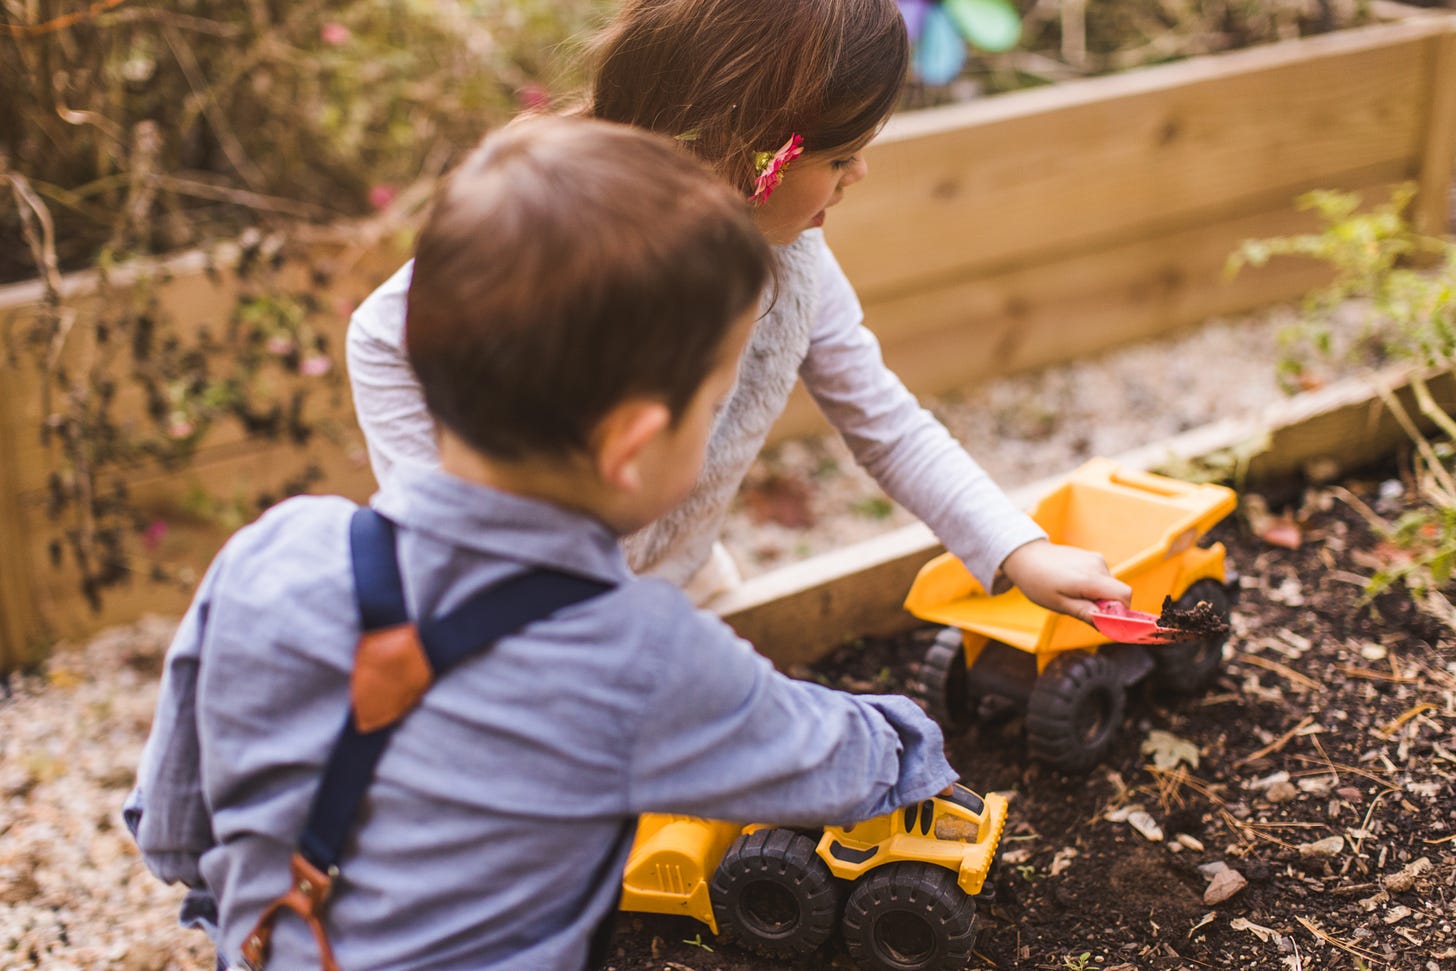 Kids playing with trucks in their garden beds.